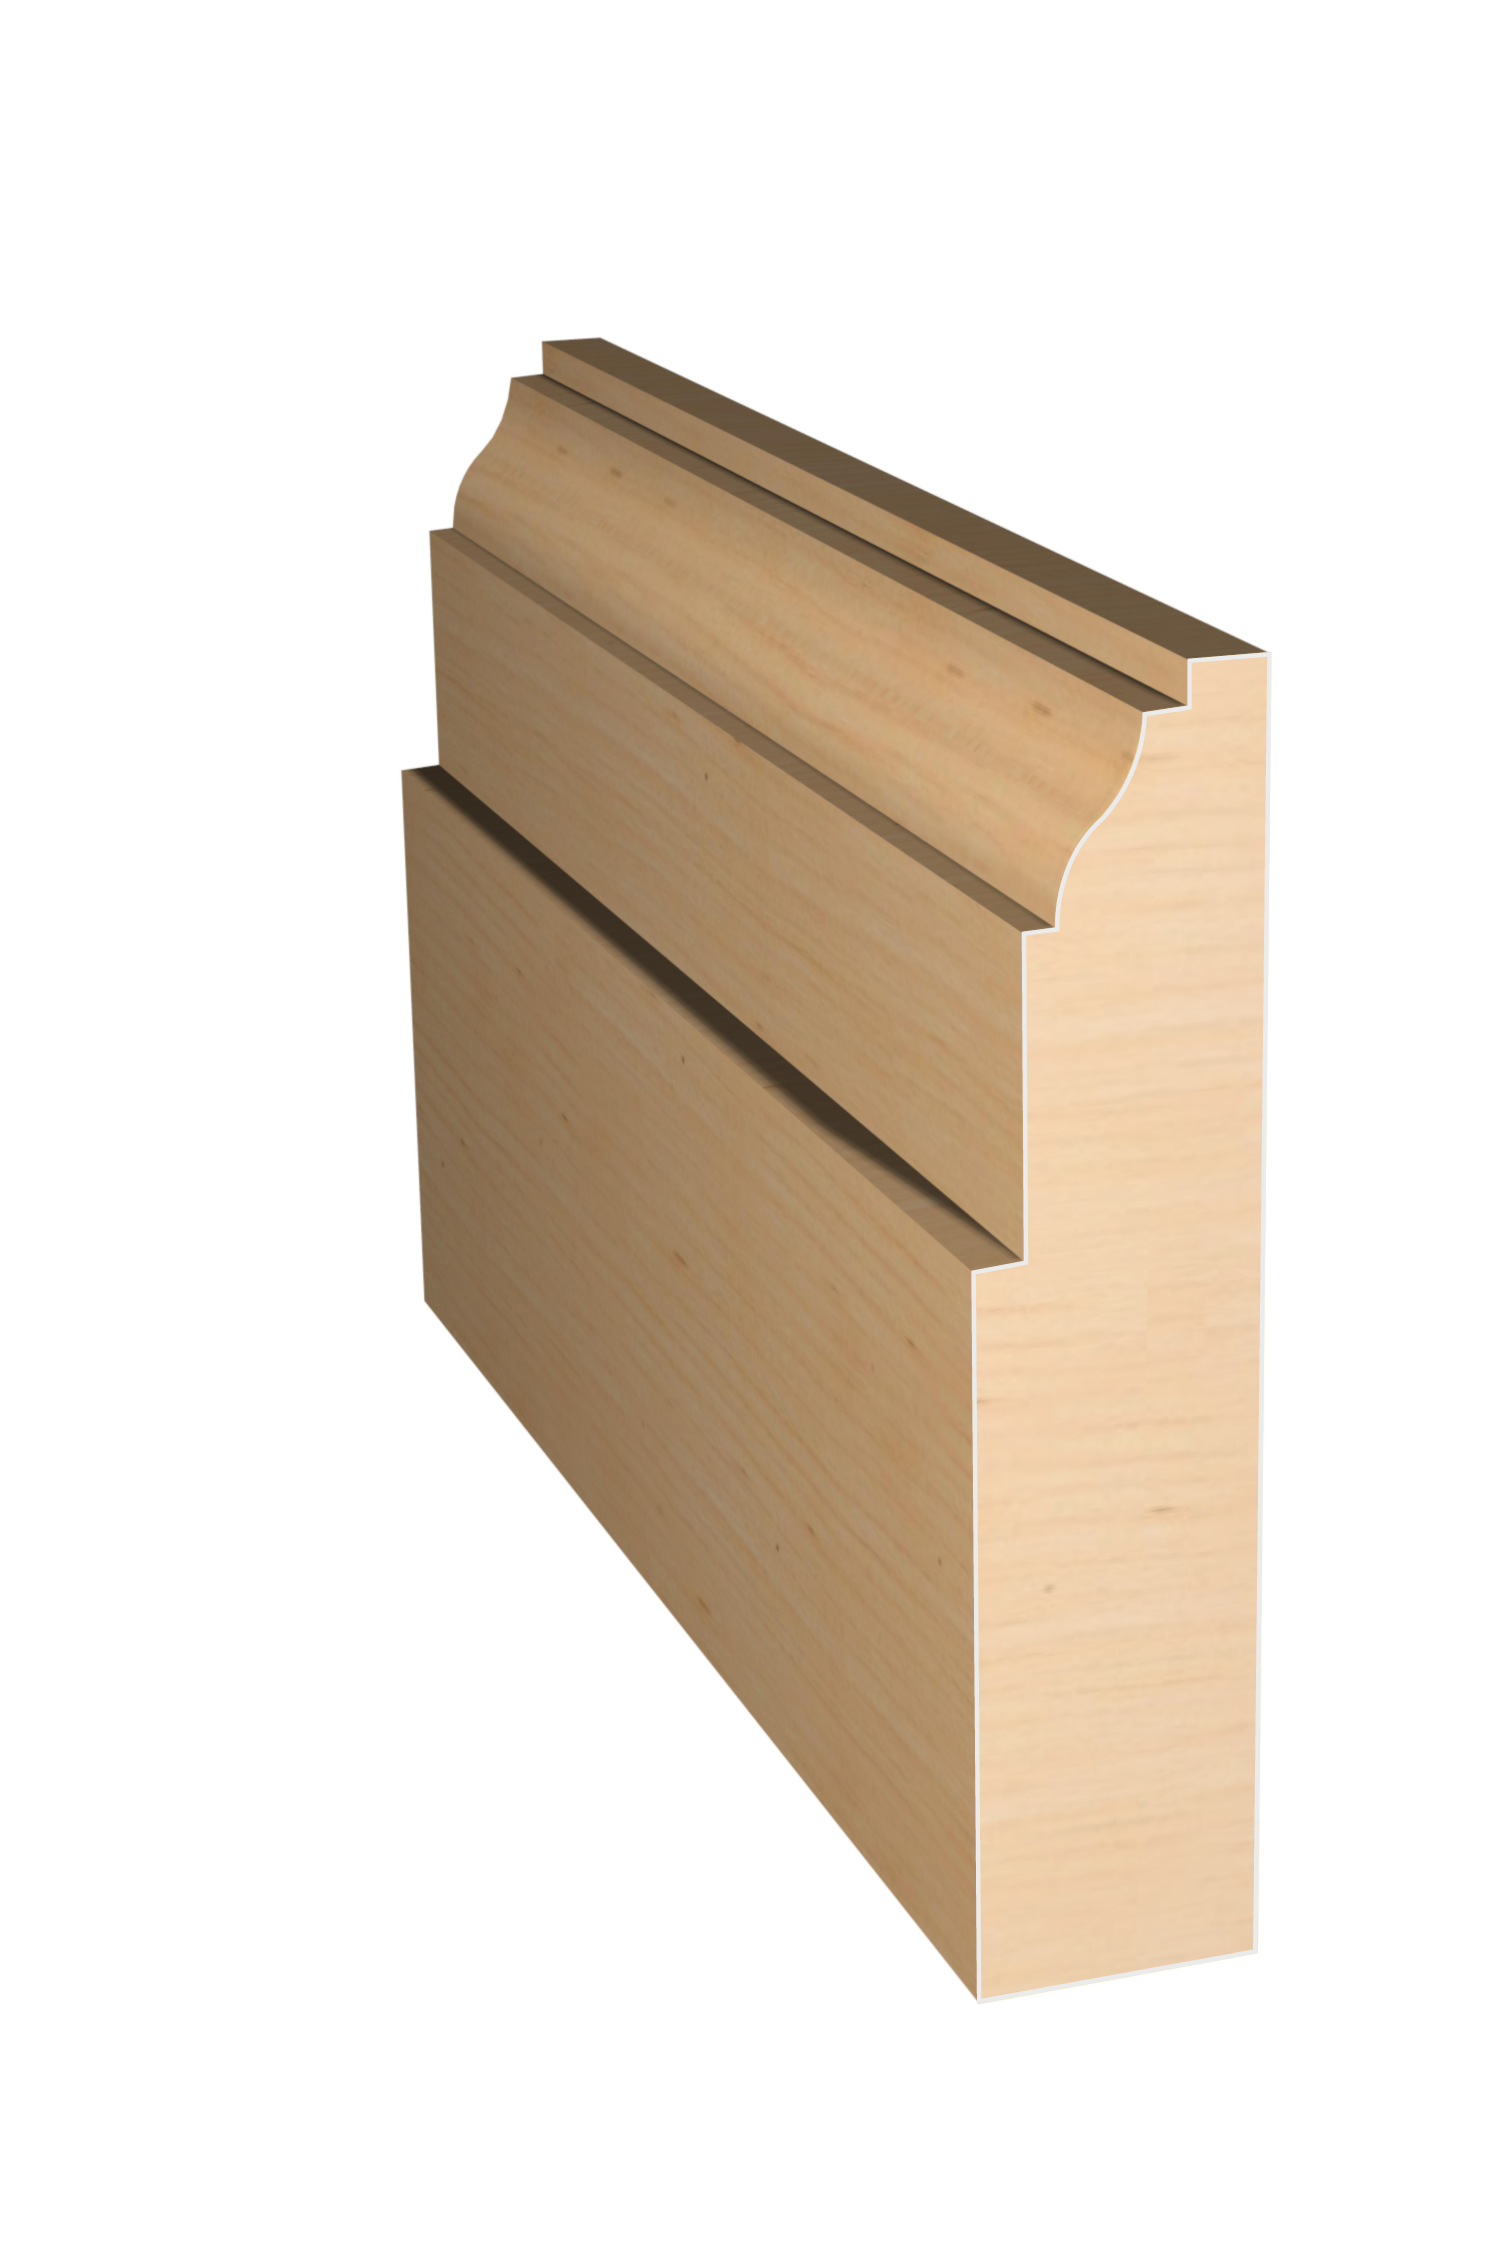 Three dimensional rendering of custom casing wood molding CAPL3582 made by Public Lumber Company in Detroit.